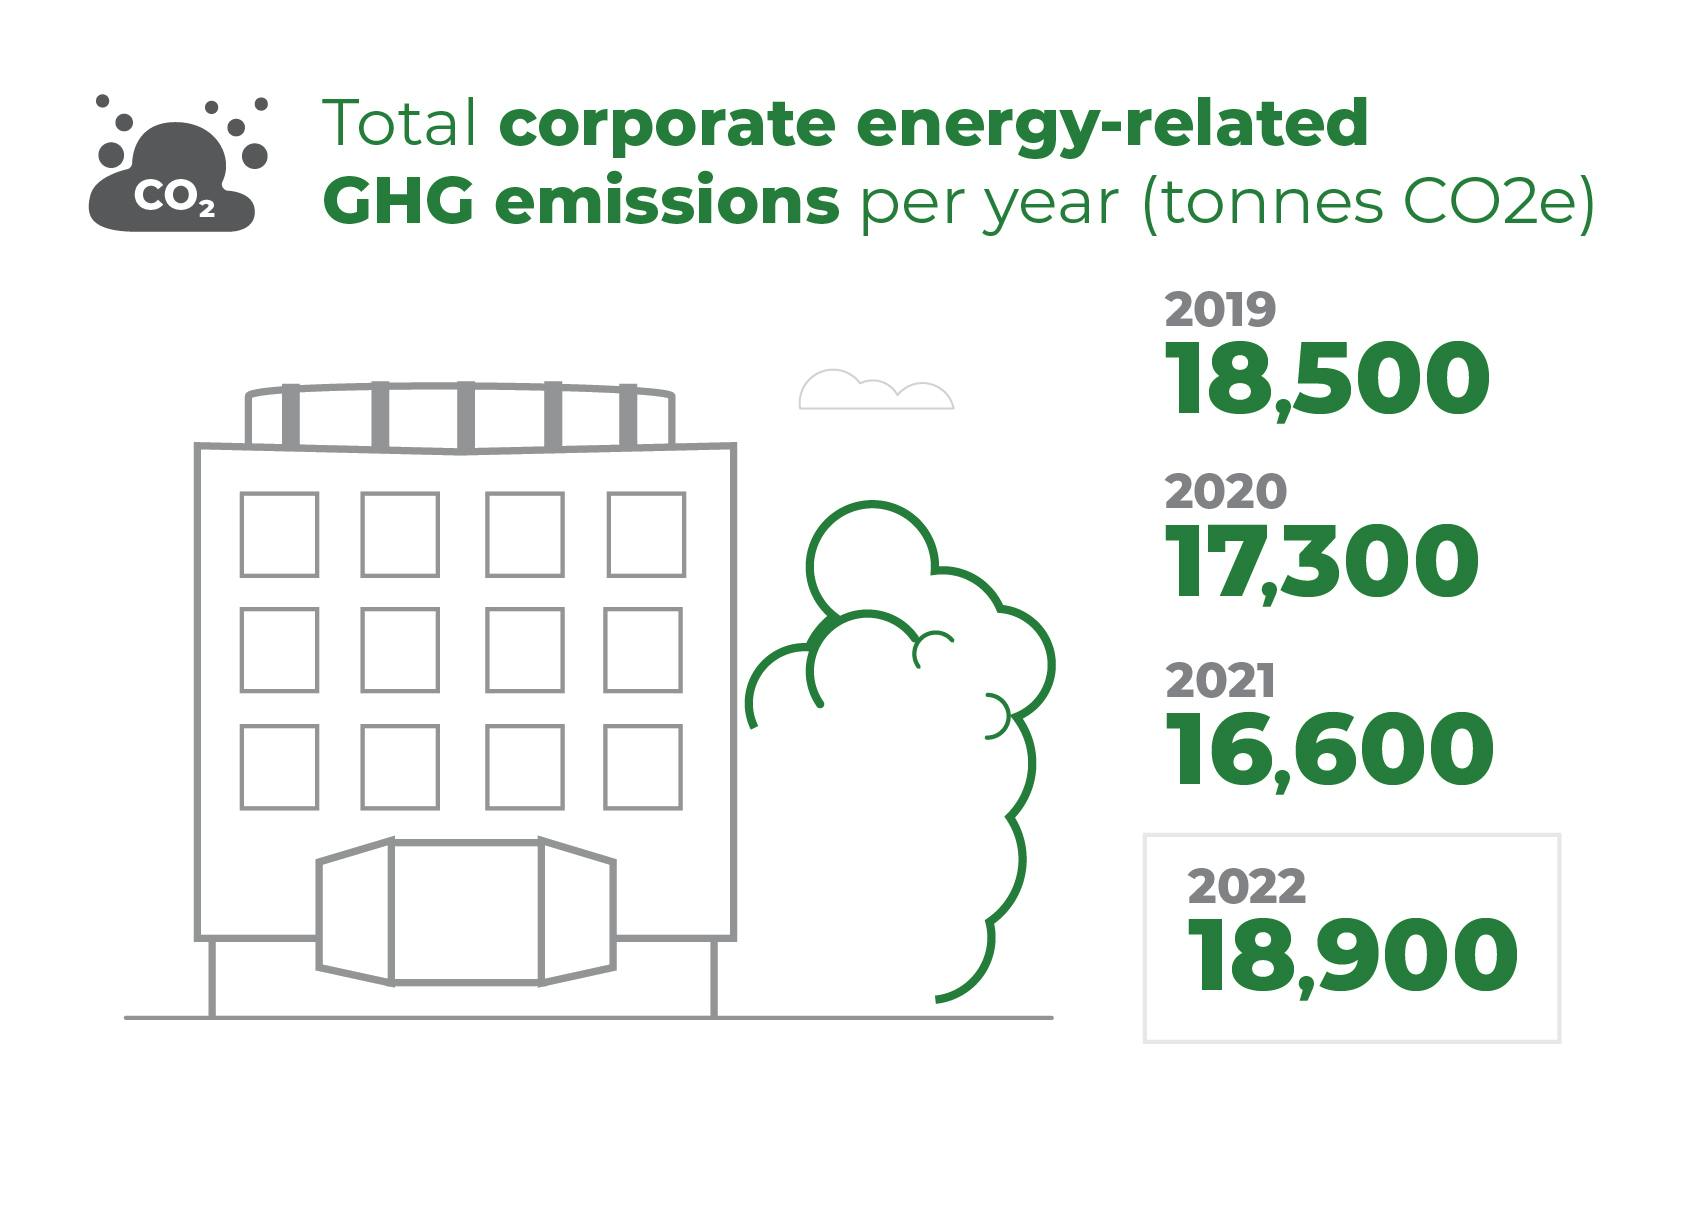 Total corporate energy related GHG emissions per year (2019-2022)